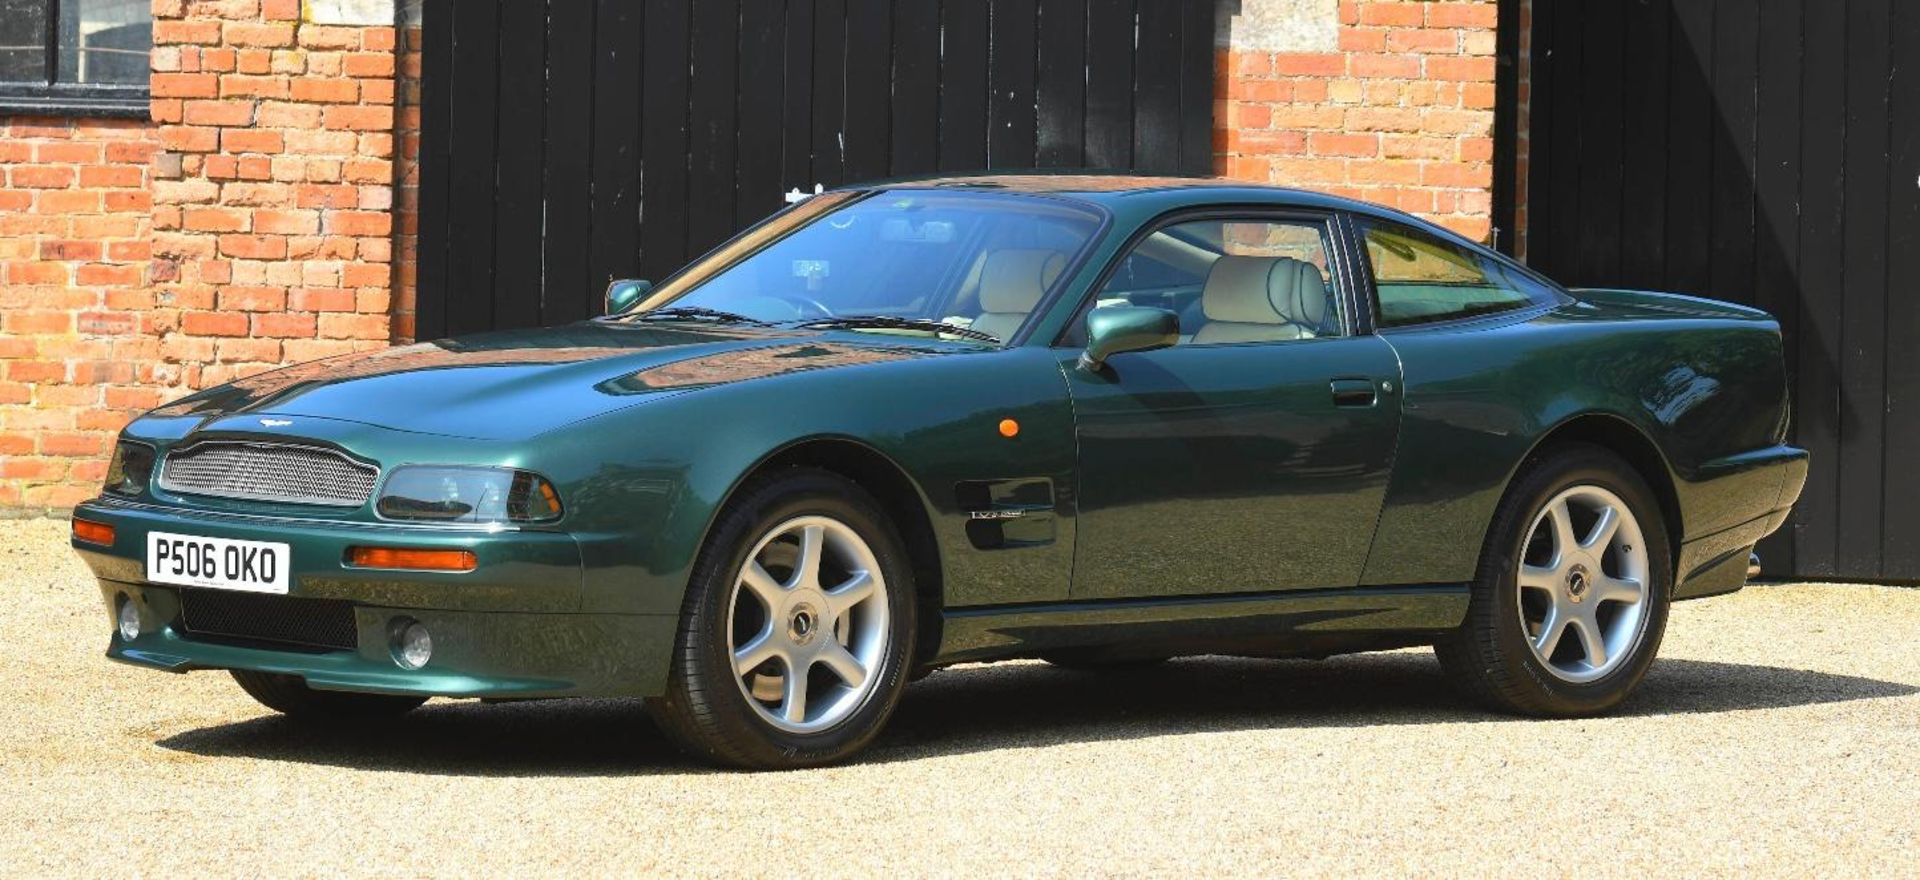 1996 Aston Martin V8 Coupe - one of only 101 made.